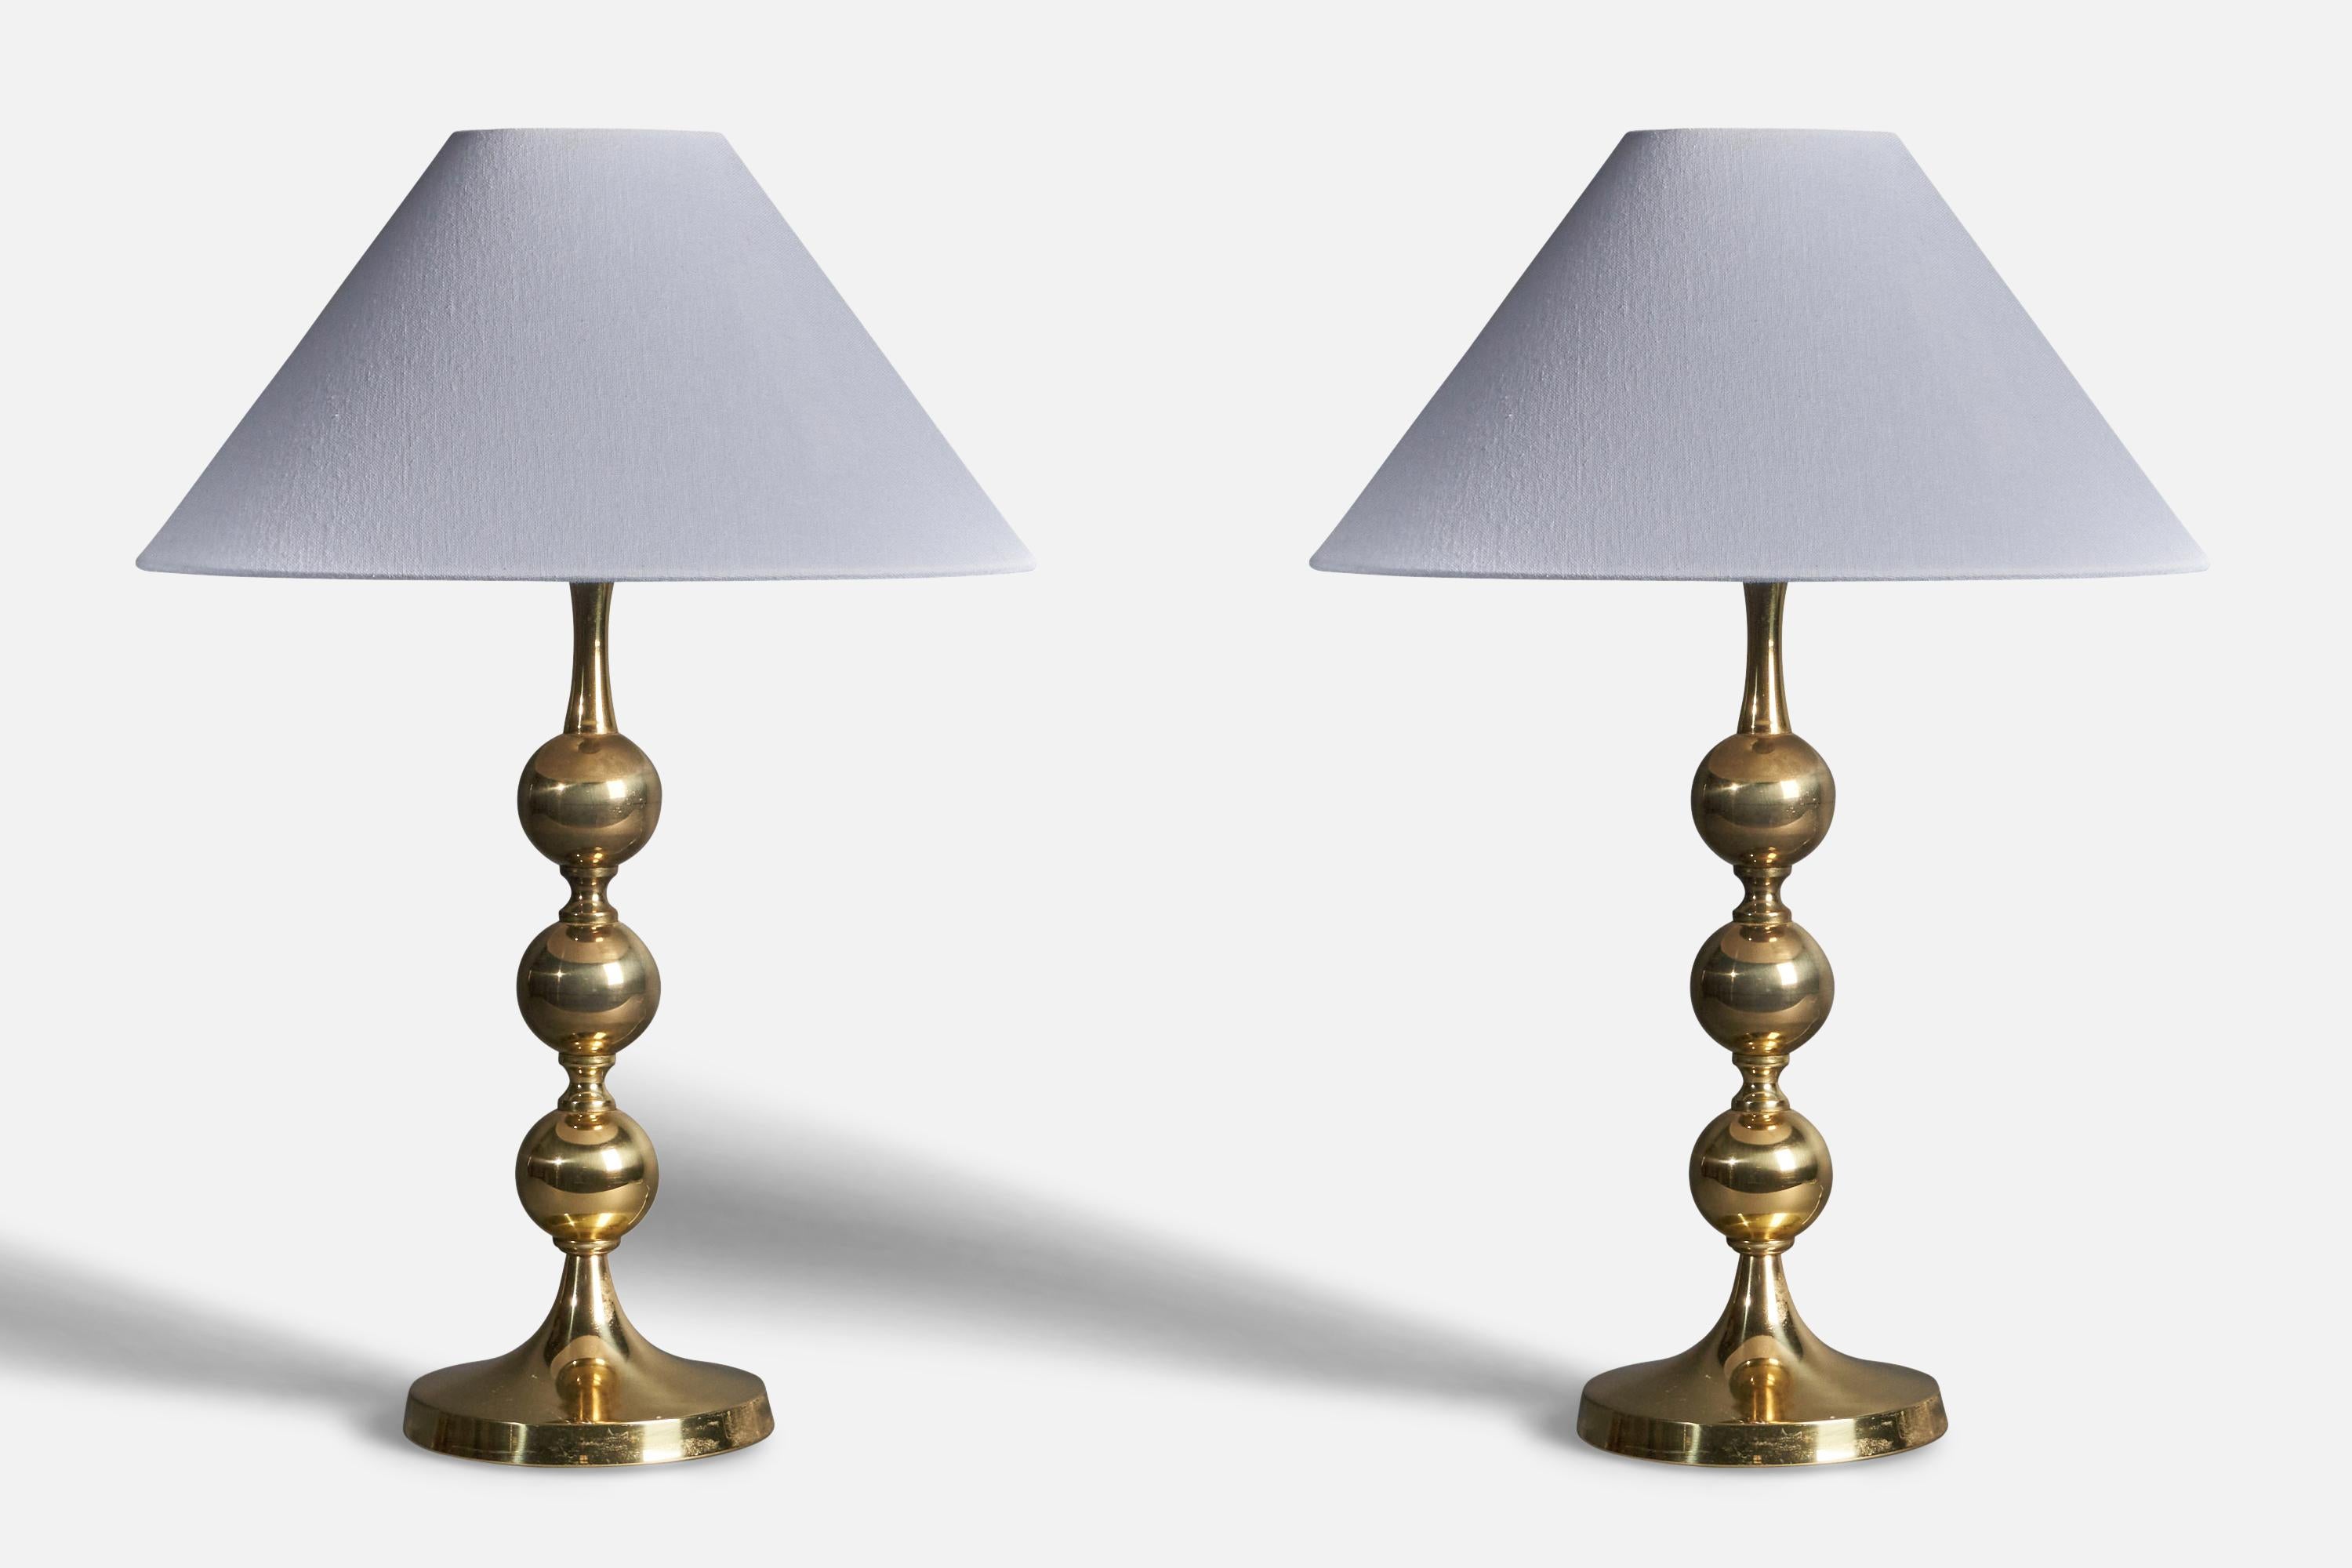 A pair of table lamps, designed and produced by Aneta, Sweden, 1970s. Sold without lampshades.

Other designers of the period include Hans Agne Jakobsson, Paavo Tynell, Josef Frank, Lisa Johansson-Pape, and Hans Wegner.